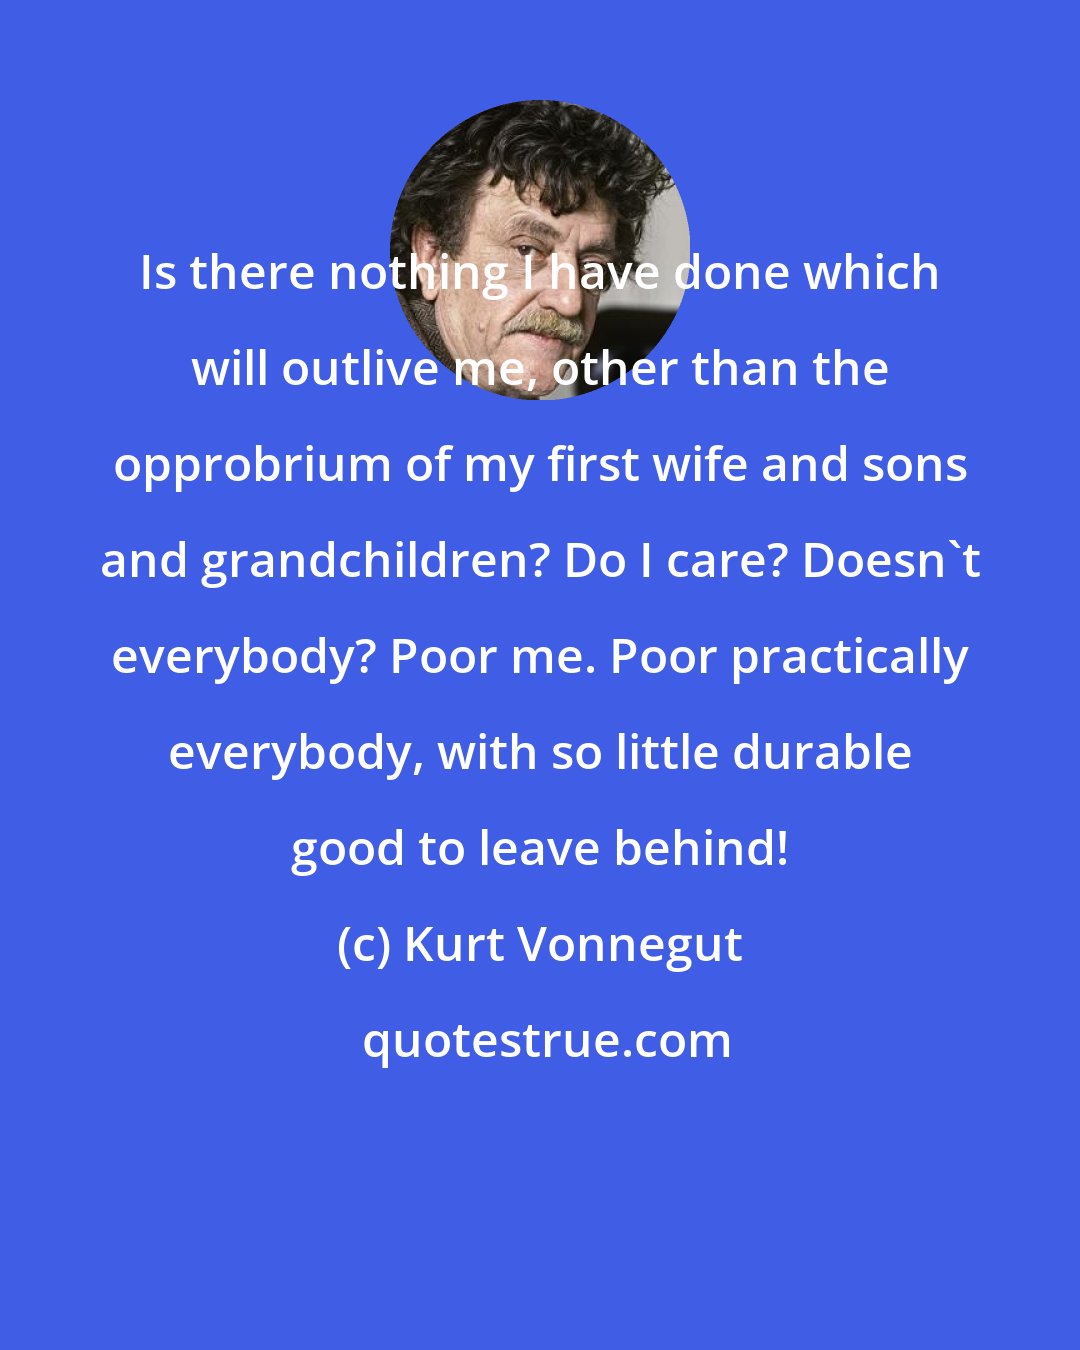 Kurt Vonnegut: Is there nothing I have done which will outlive me, other than the opprobrium of my first wife and sons and grandchildren? Do I care? Doesn't everybody? Poor me. Poor practically everybody, with so little durable good to leave behind!